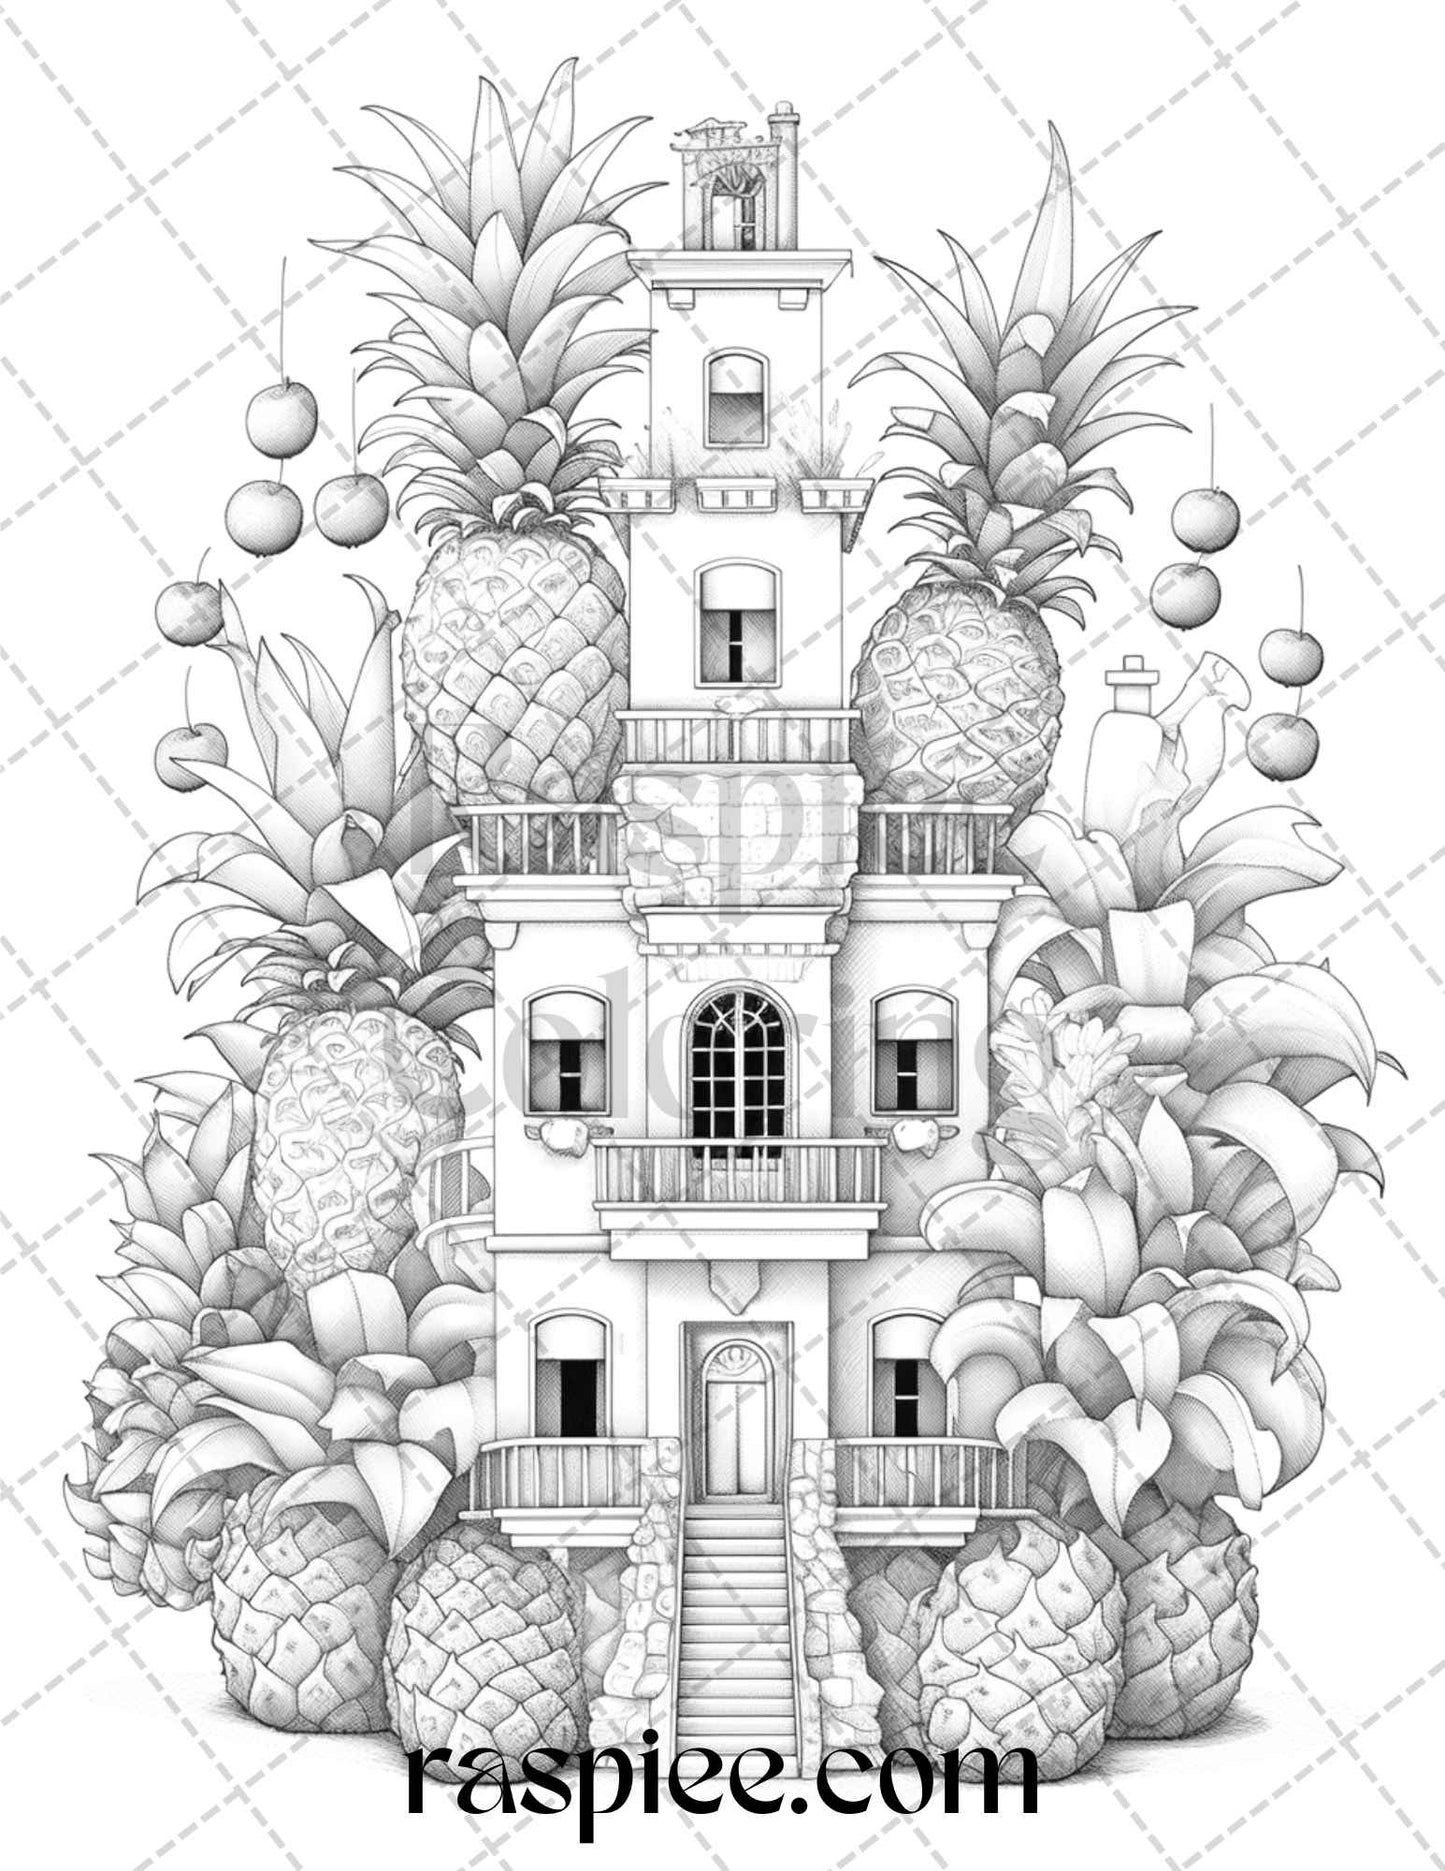 grayscale coloring pages, printable for adults, pineapple houses, adult coloring, grayscale art